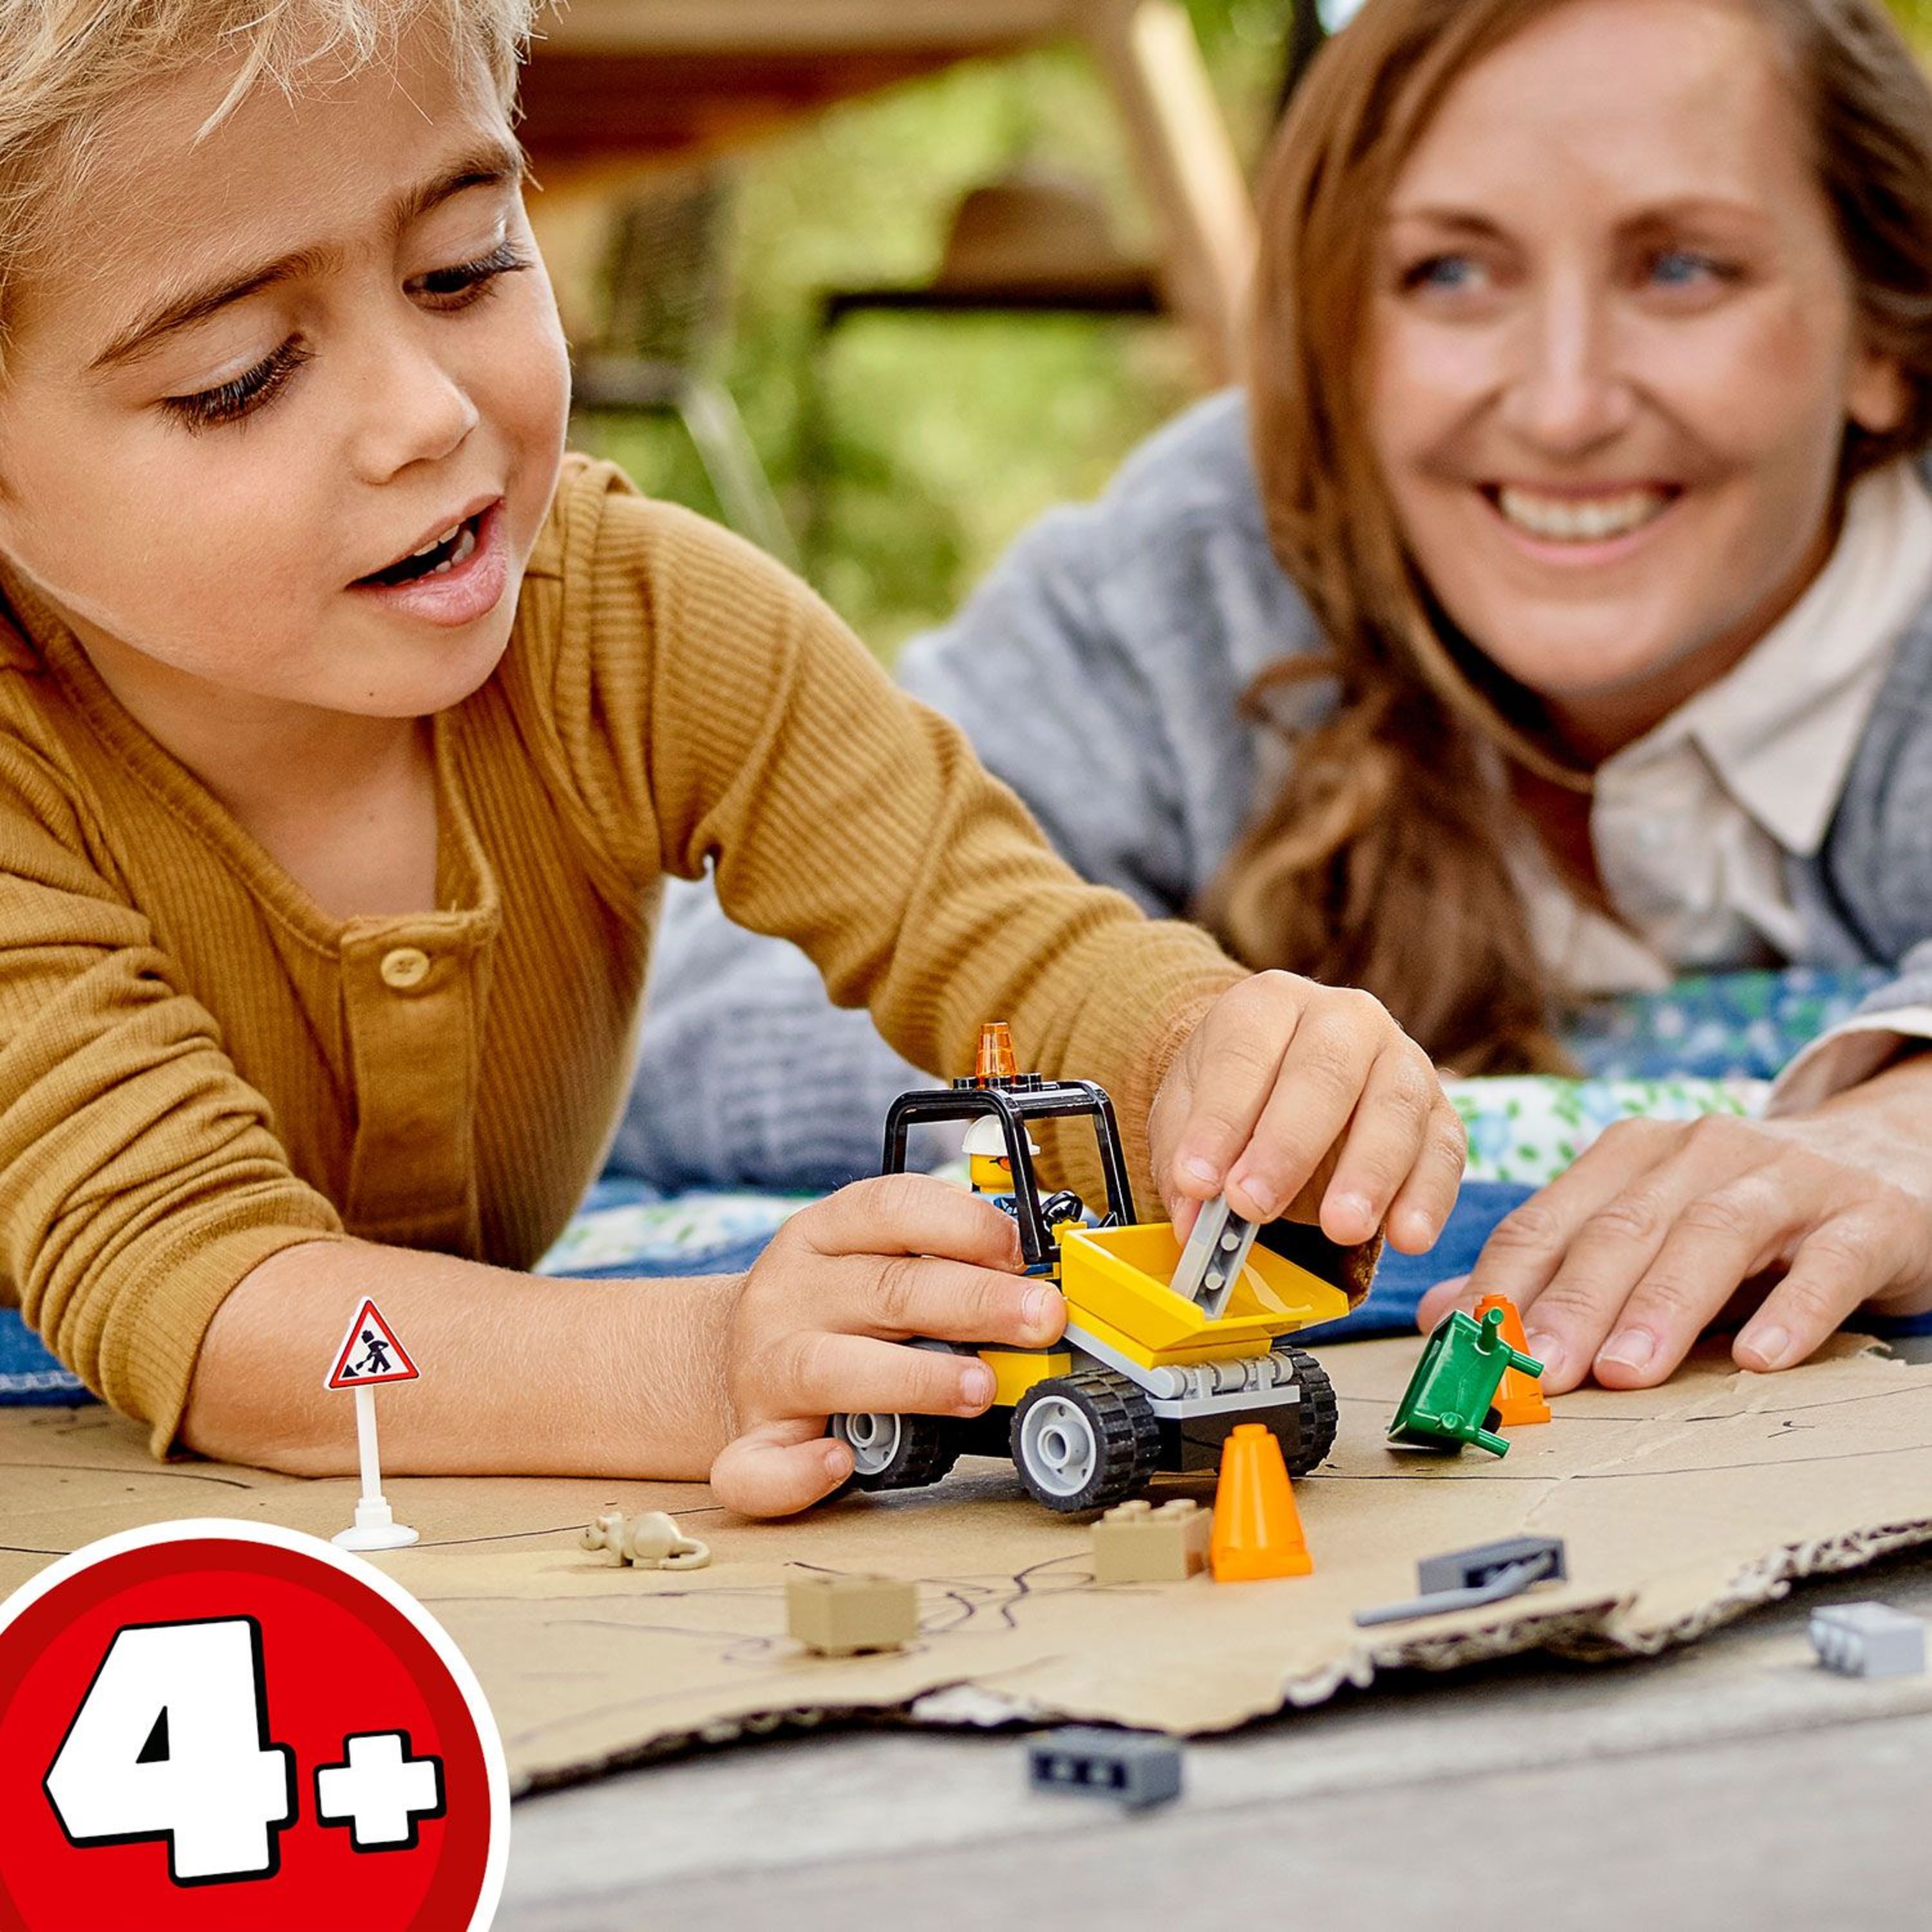 LEGO City Roadwork Truck 60284 Building Toy; Cool Roadworks Construction Set for Kids (58 Pieces) - image 3 of 7